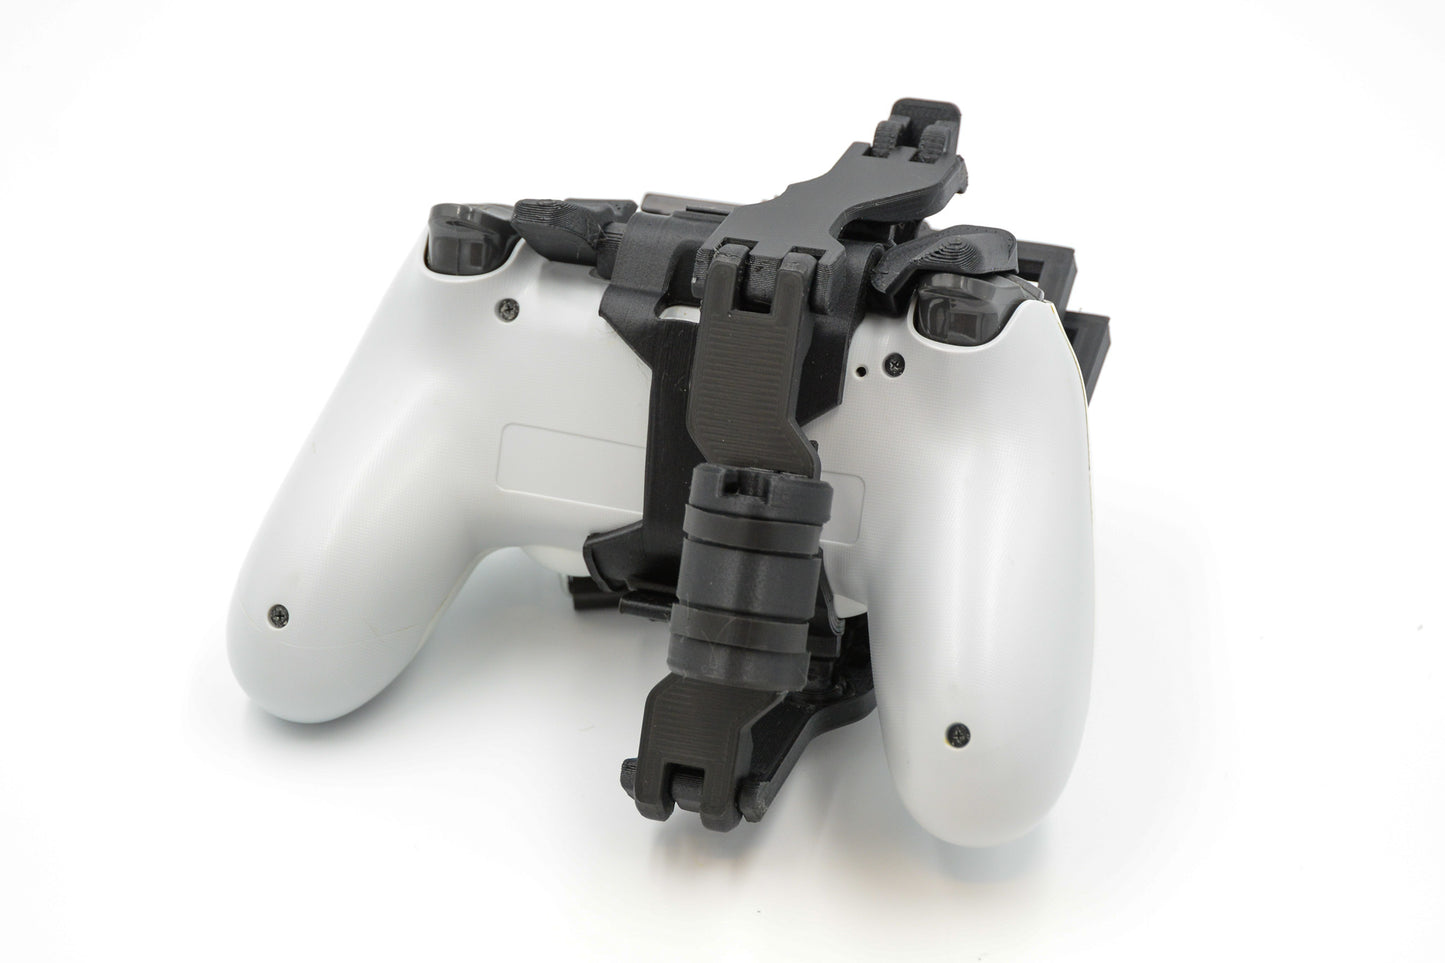 One-handed PS4 DualShock 4 Attachment